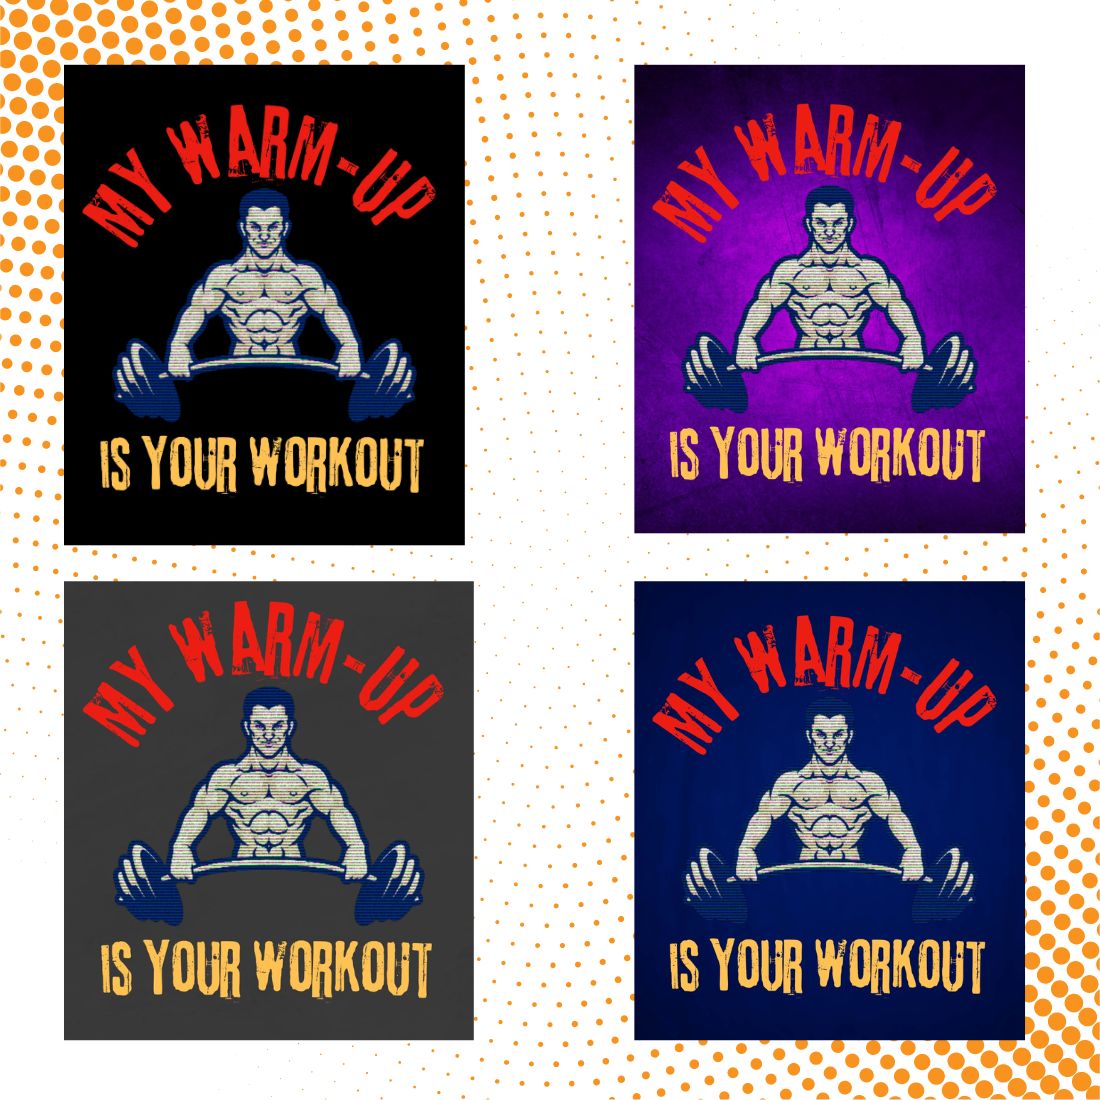 My Warm- Up Is Your Workout Fitness Motivational T-shirt Design cover image.